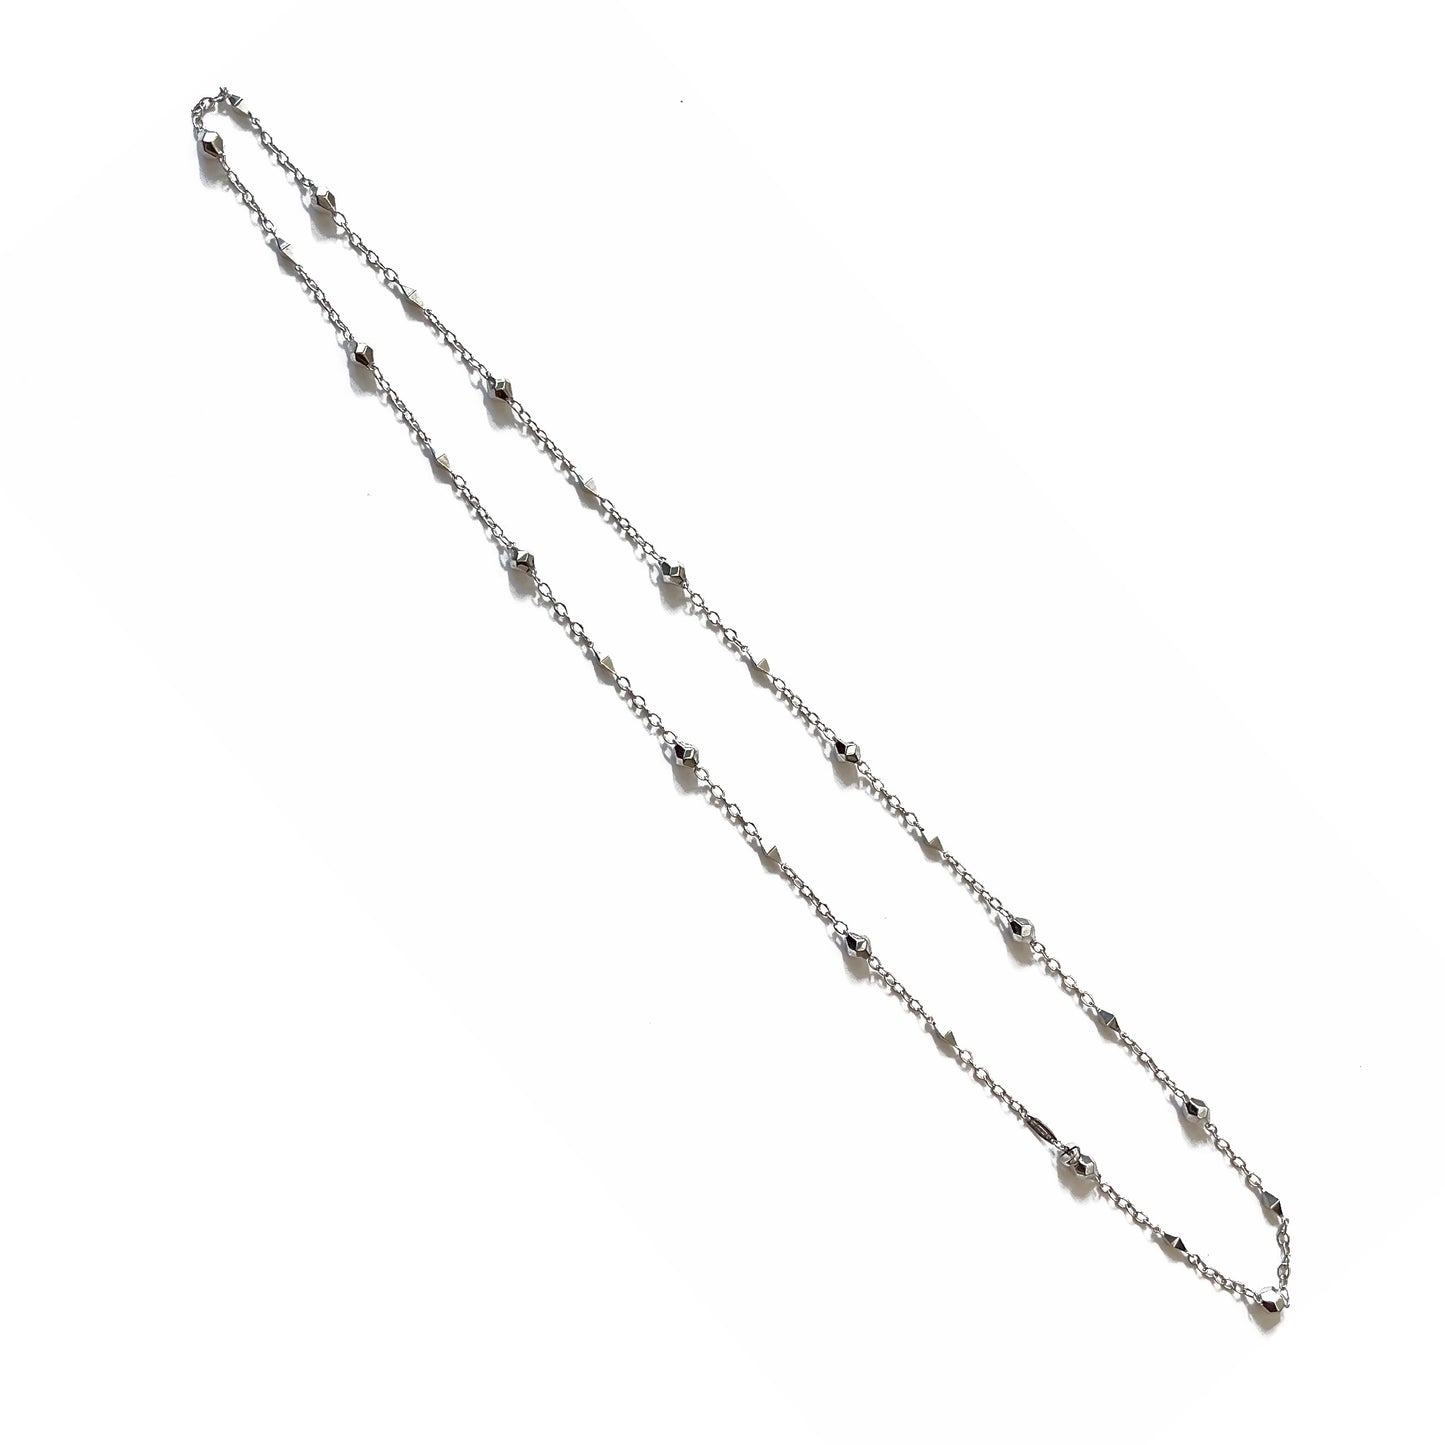 Jackson Pyramid Chain Necklace – 33in